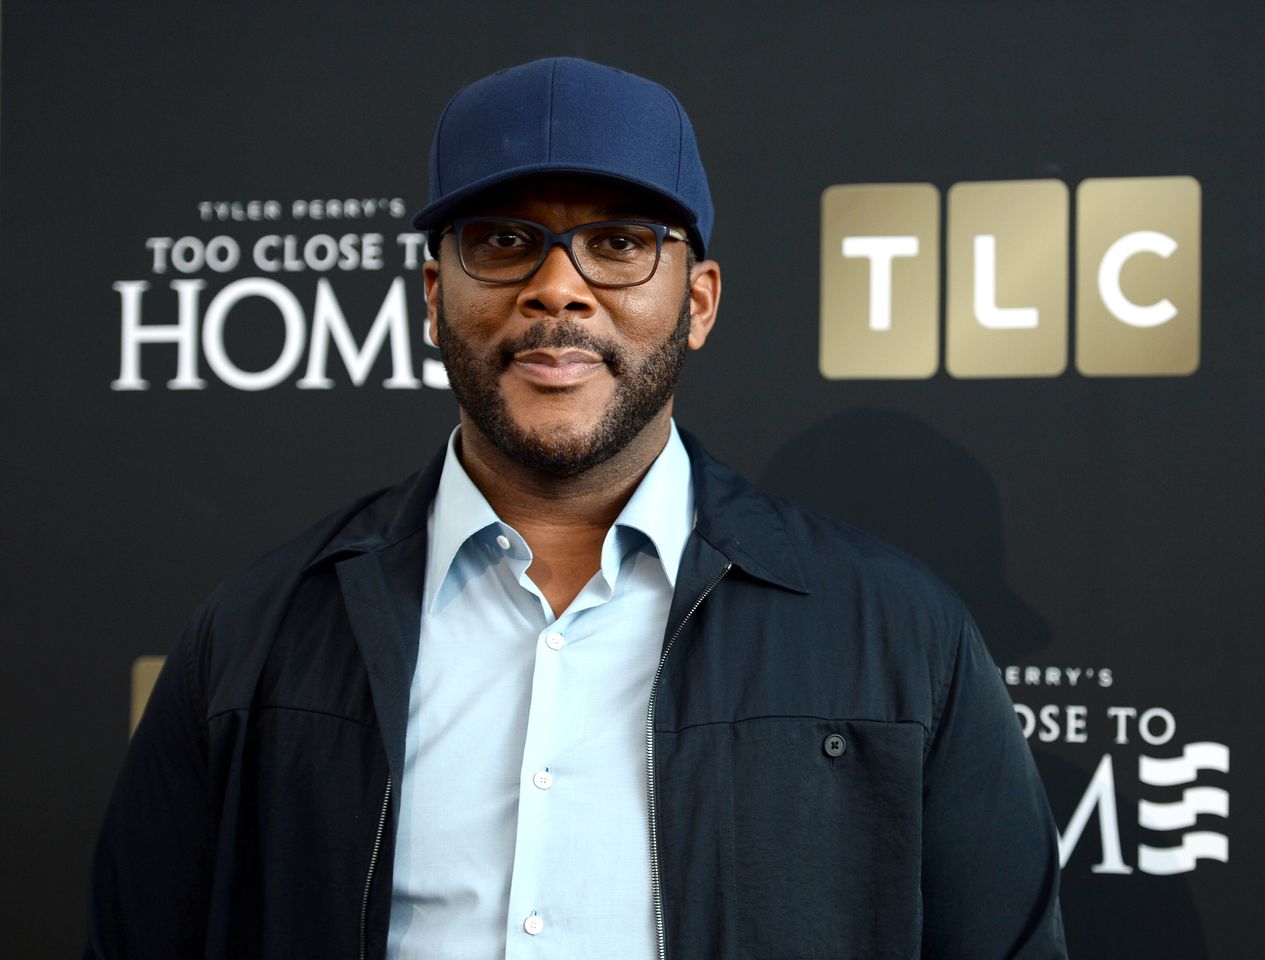 Tyler Perry at TLC's "Too Close To Home" screening in Beverly Hills on August 16, 2016. | Photo: Getty Images